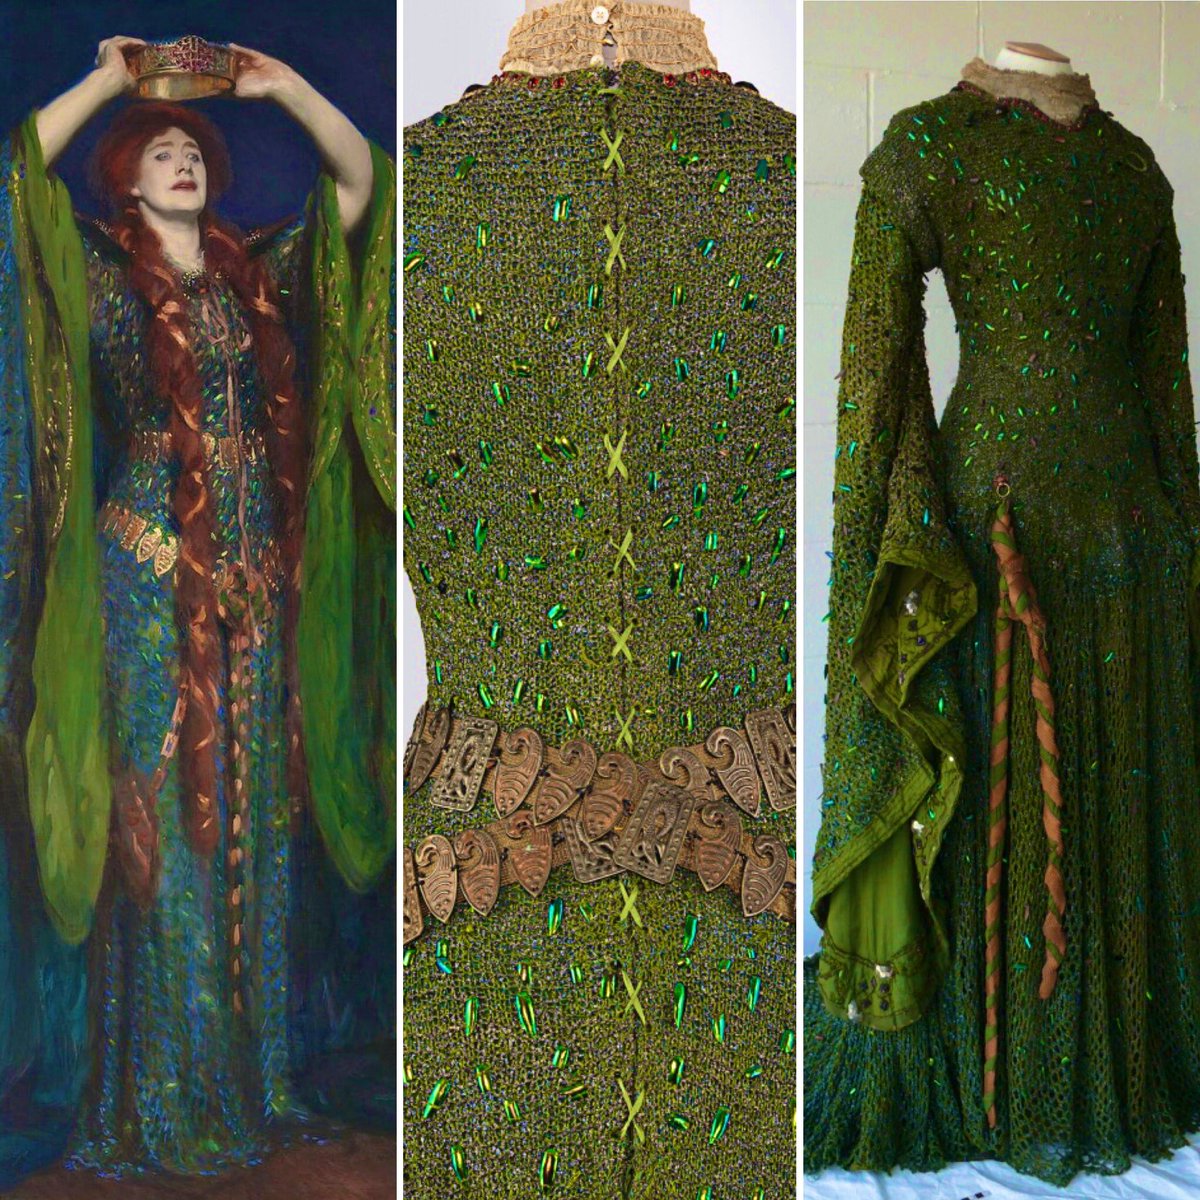 Ellen Terry’s famous ‘beetle wing’ dress was designed for her by esteemed costumier Alice Comyns Carr & first worn on stage in Dec 1888. Meant to invoke fear, the addition of 1000 beetlewing cases created the effect of scales. Restored from 2006-2011. #LegendaryWednesday